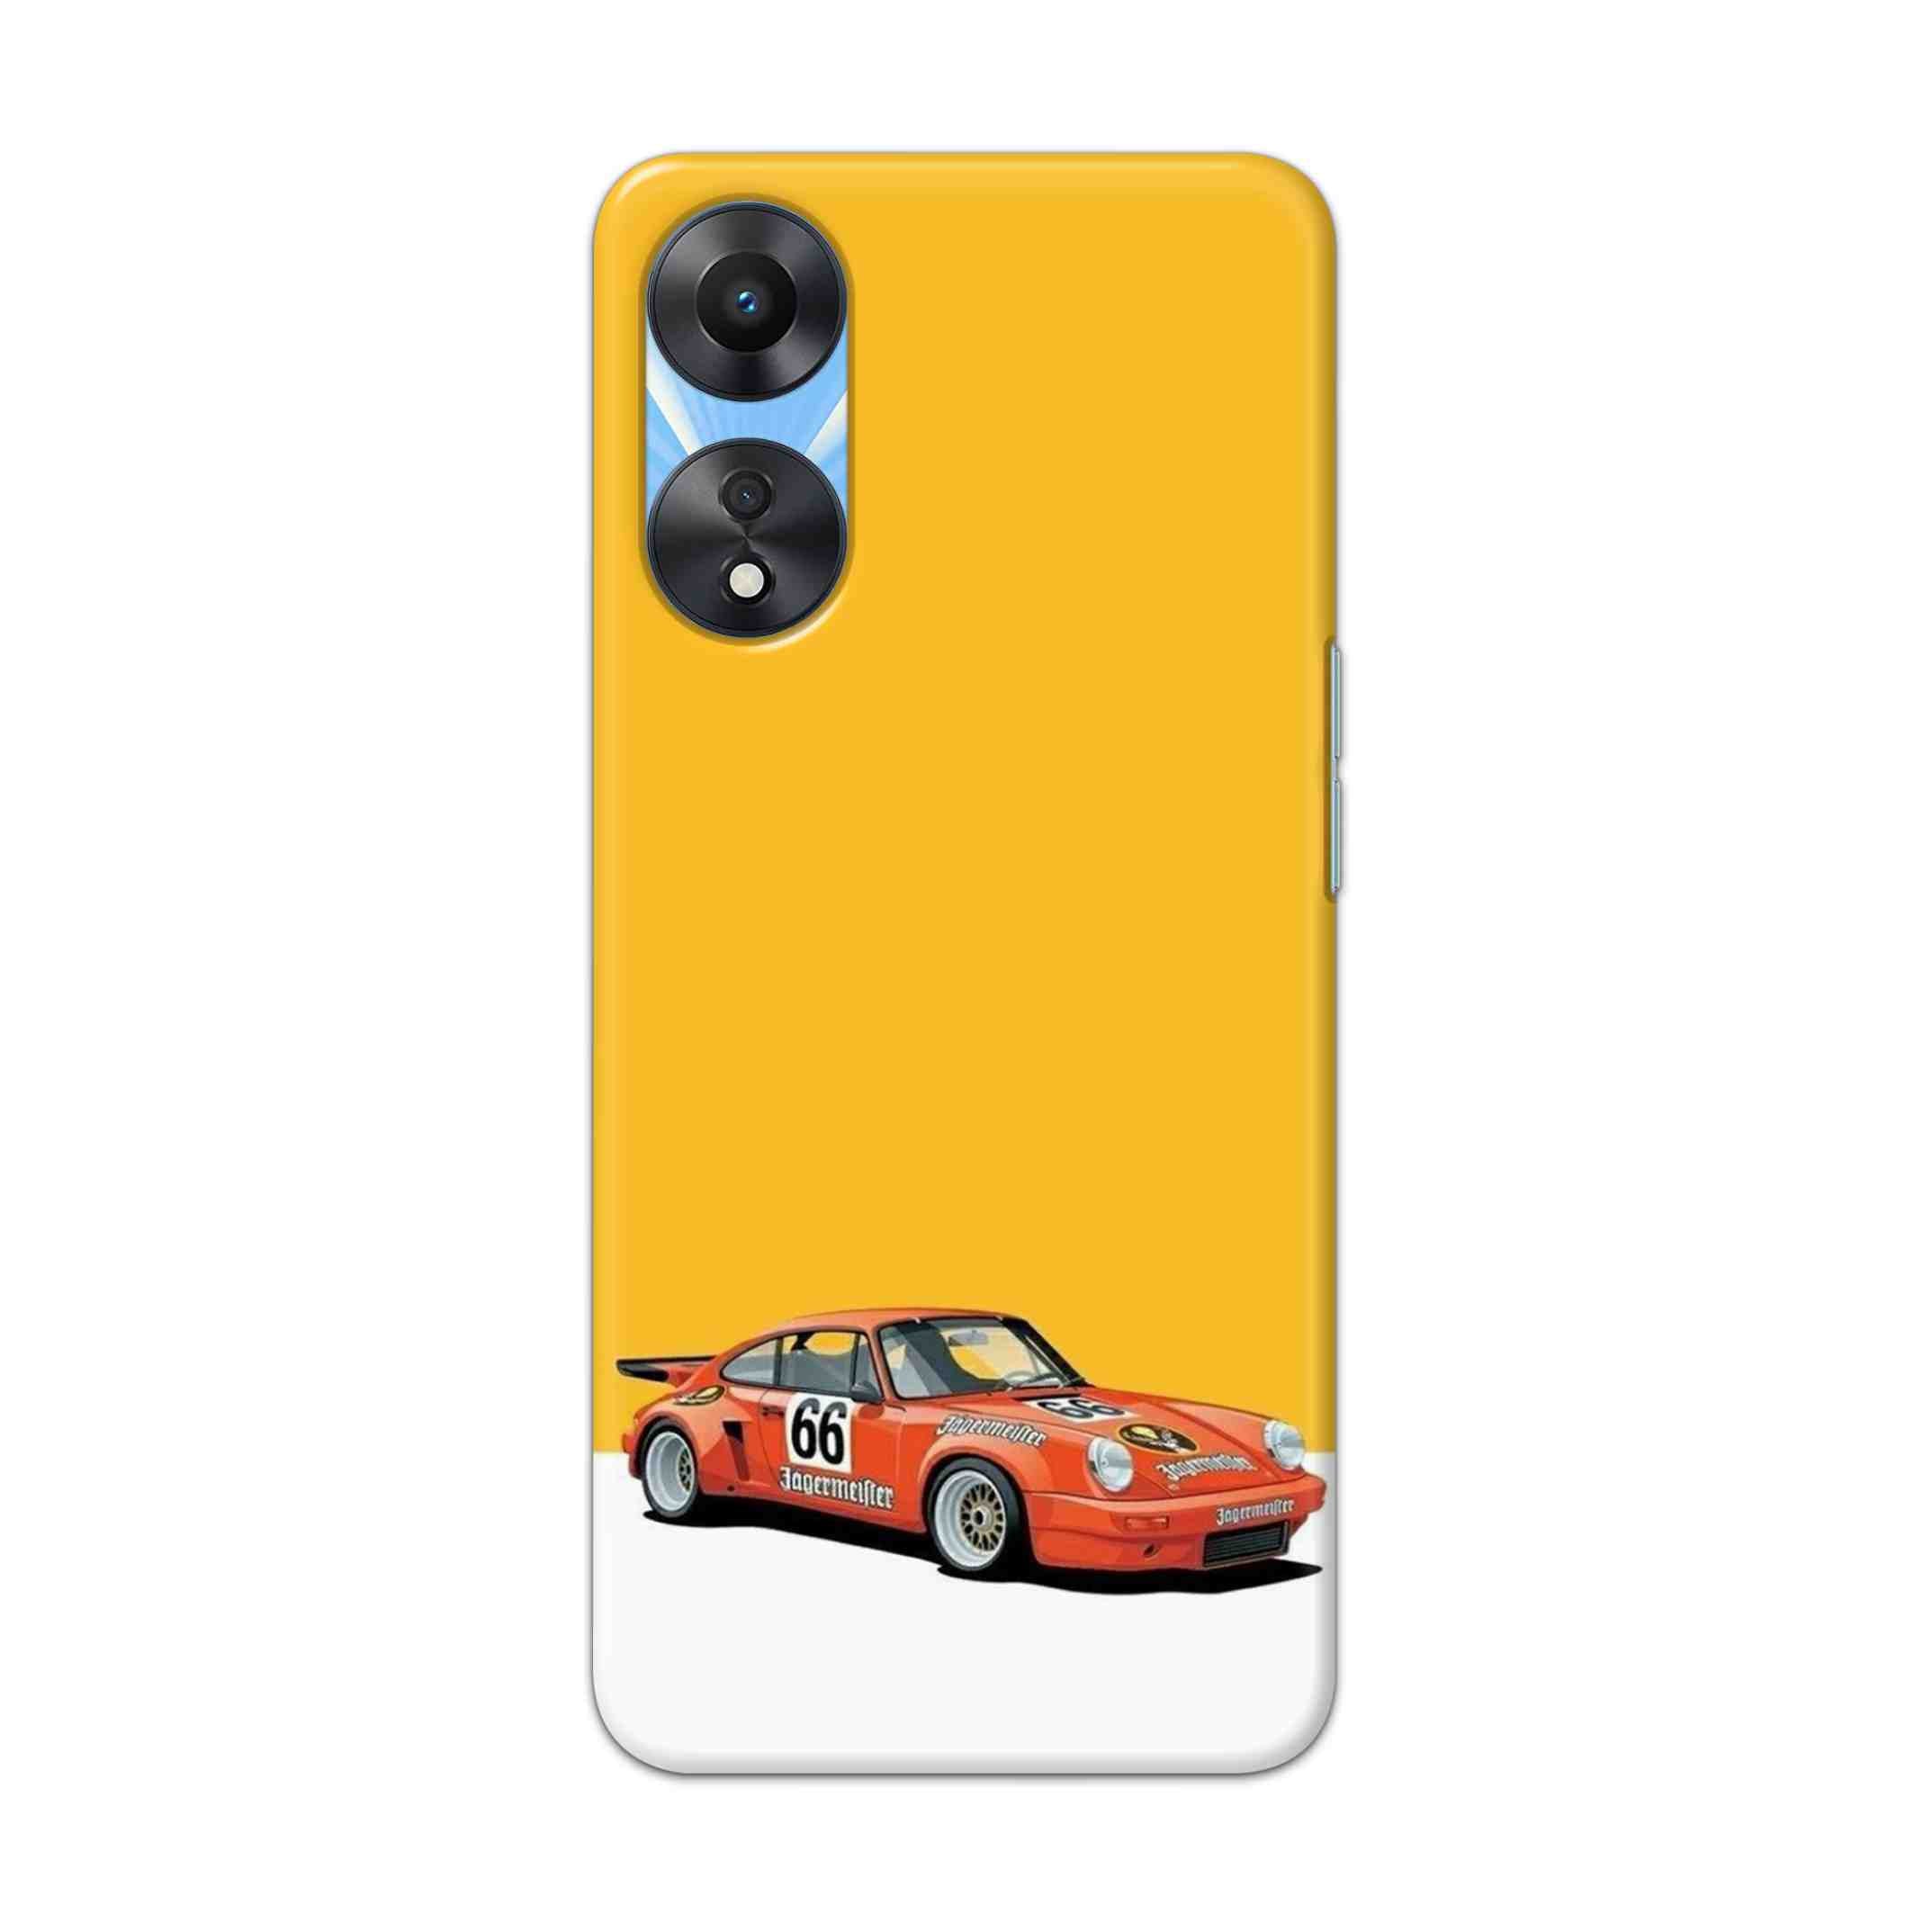 Buy Porche Hard Back Mobile Phone Case Cover For OPPO A78 Online